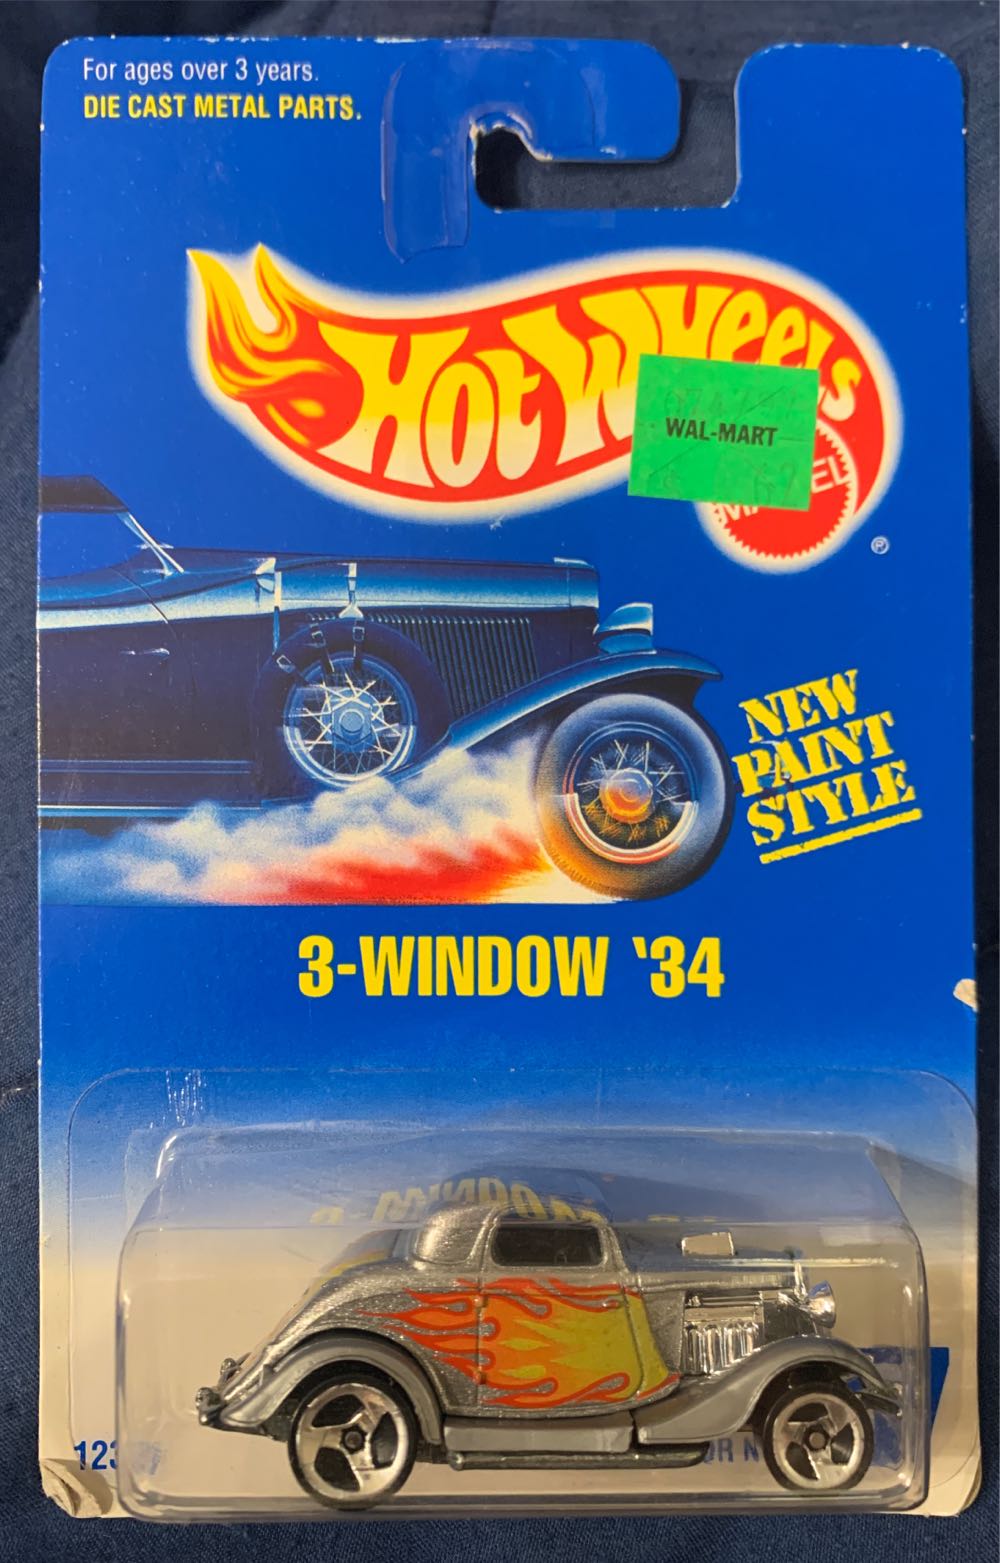 3-Window 34 - Speed Gleamer Series toy car collectible - Main Image 3